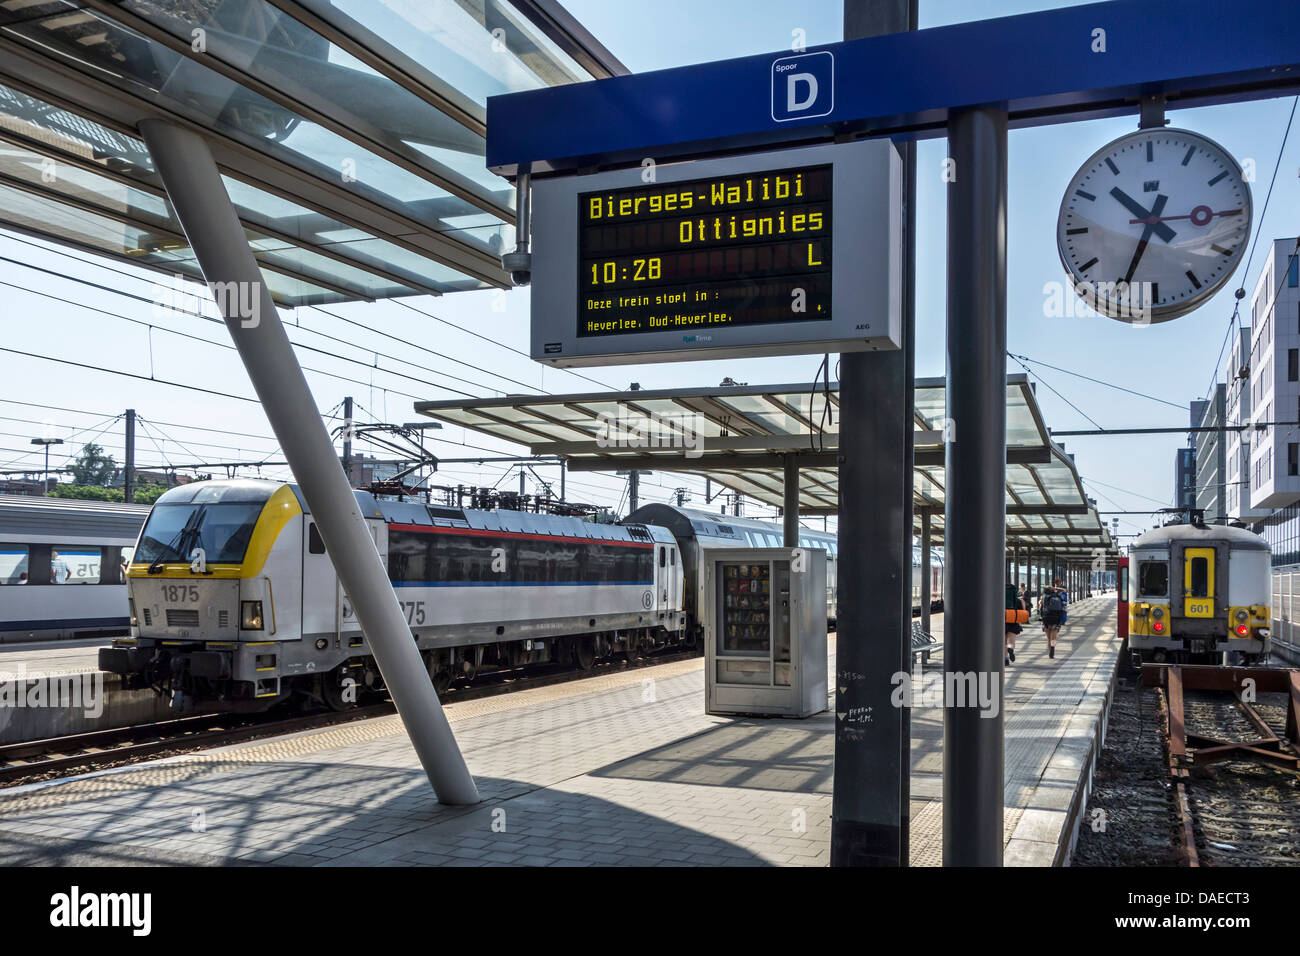 Trains and platforms at the railway station in Leuven / Louvain, Belgium Stock Photo